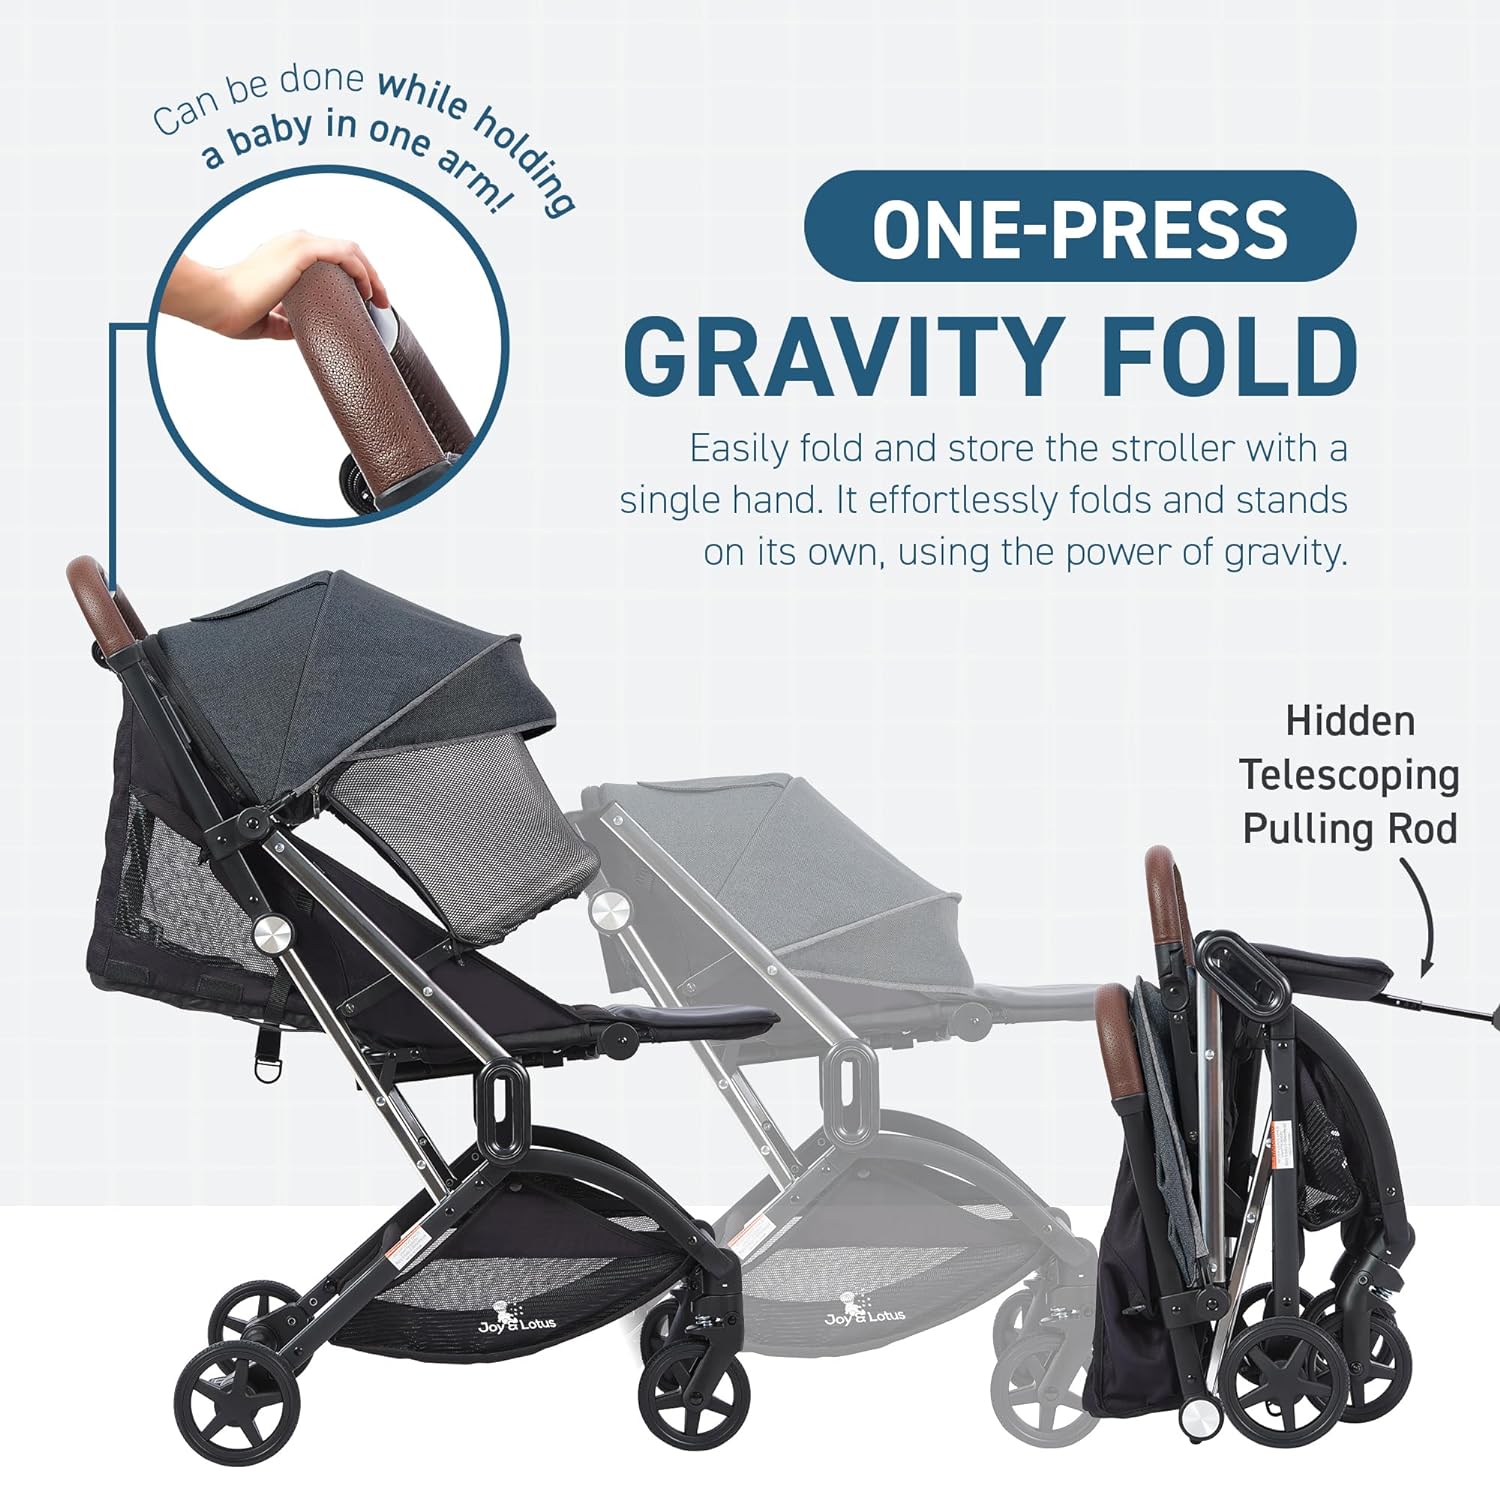 Lightweight Self Folding Baby Stroller, Ultra-Compact with One Hand Gravity Fold, Airplane Ready Travel Stroller, Near Flat Recline Seat with UV and Waterproof Canopy